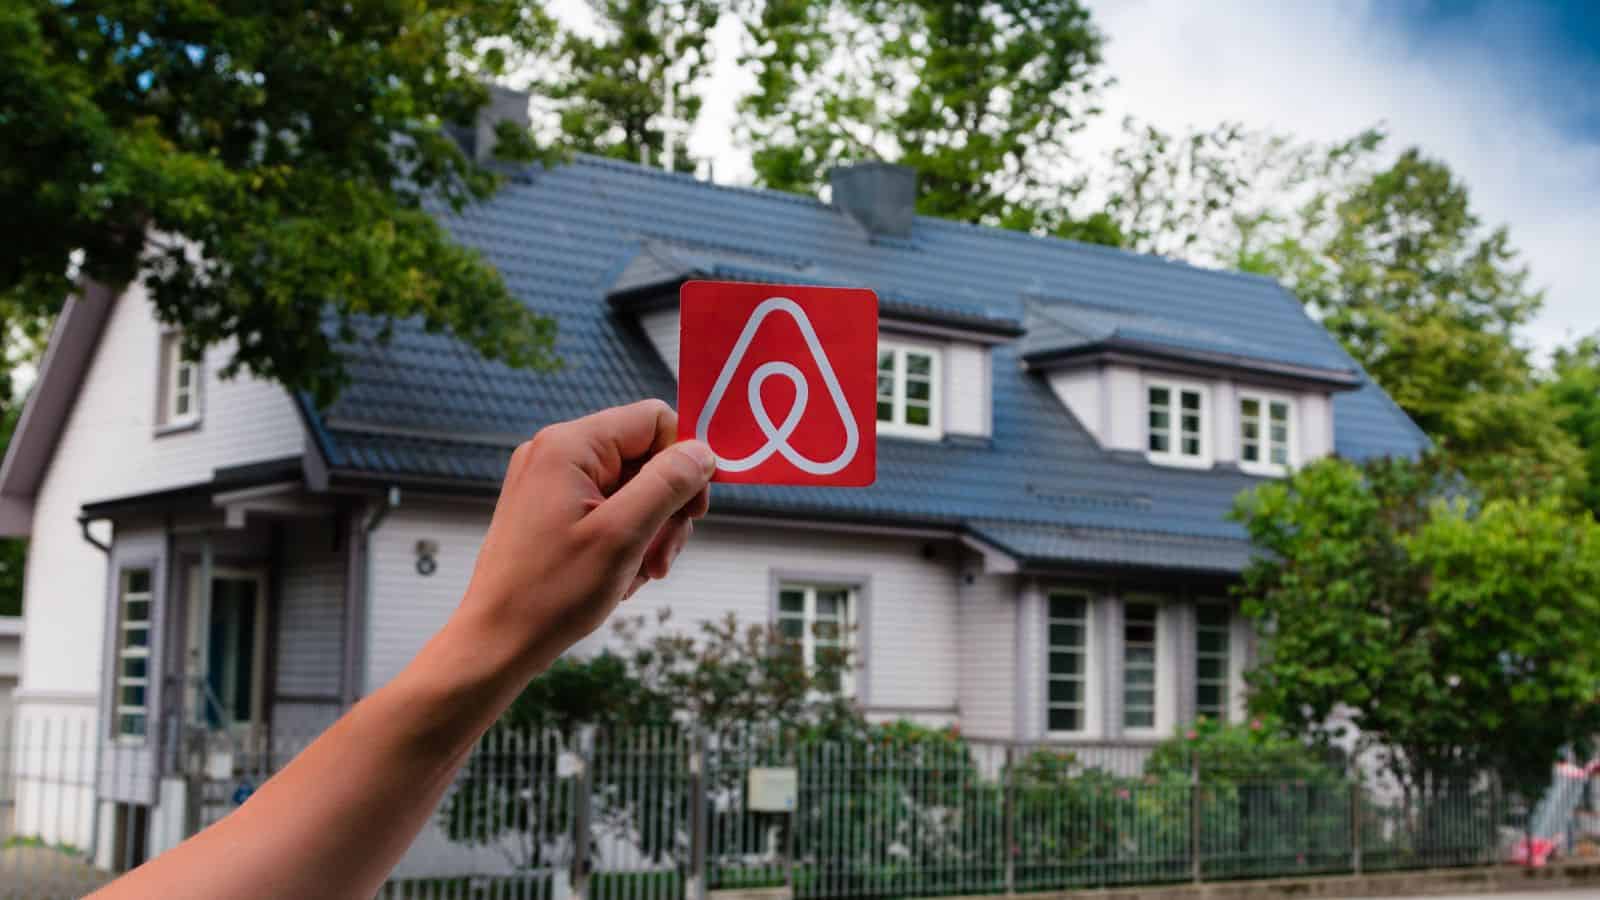 Airbnb – Greedy Owners AlesiaKan _ Shutterstock.com